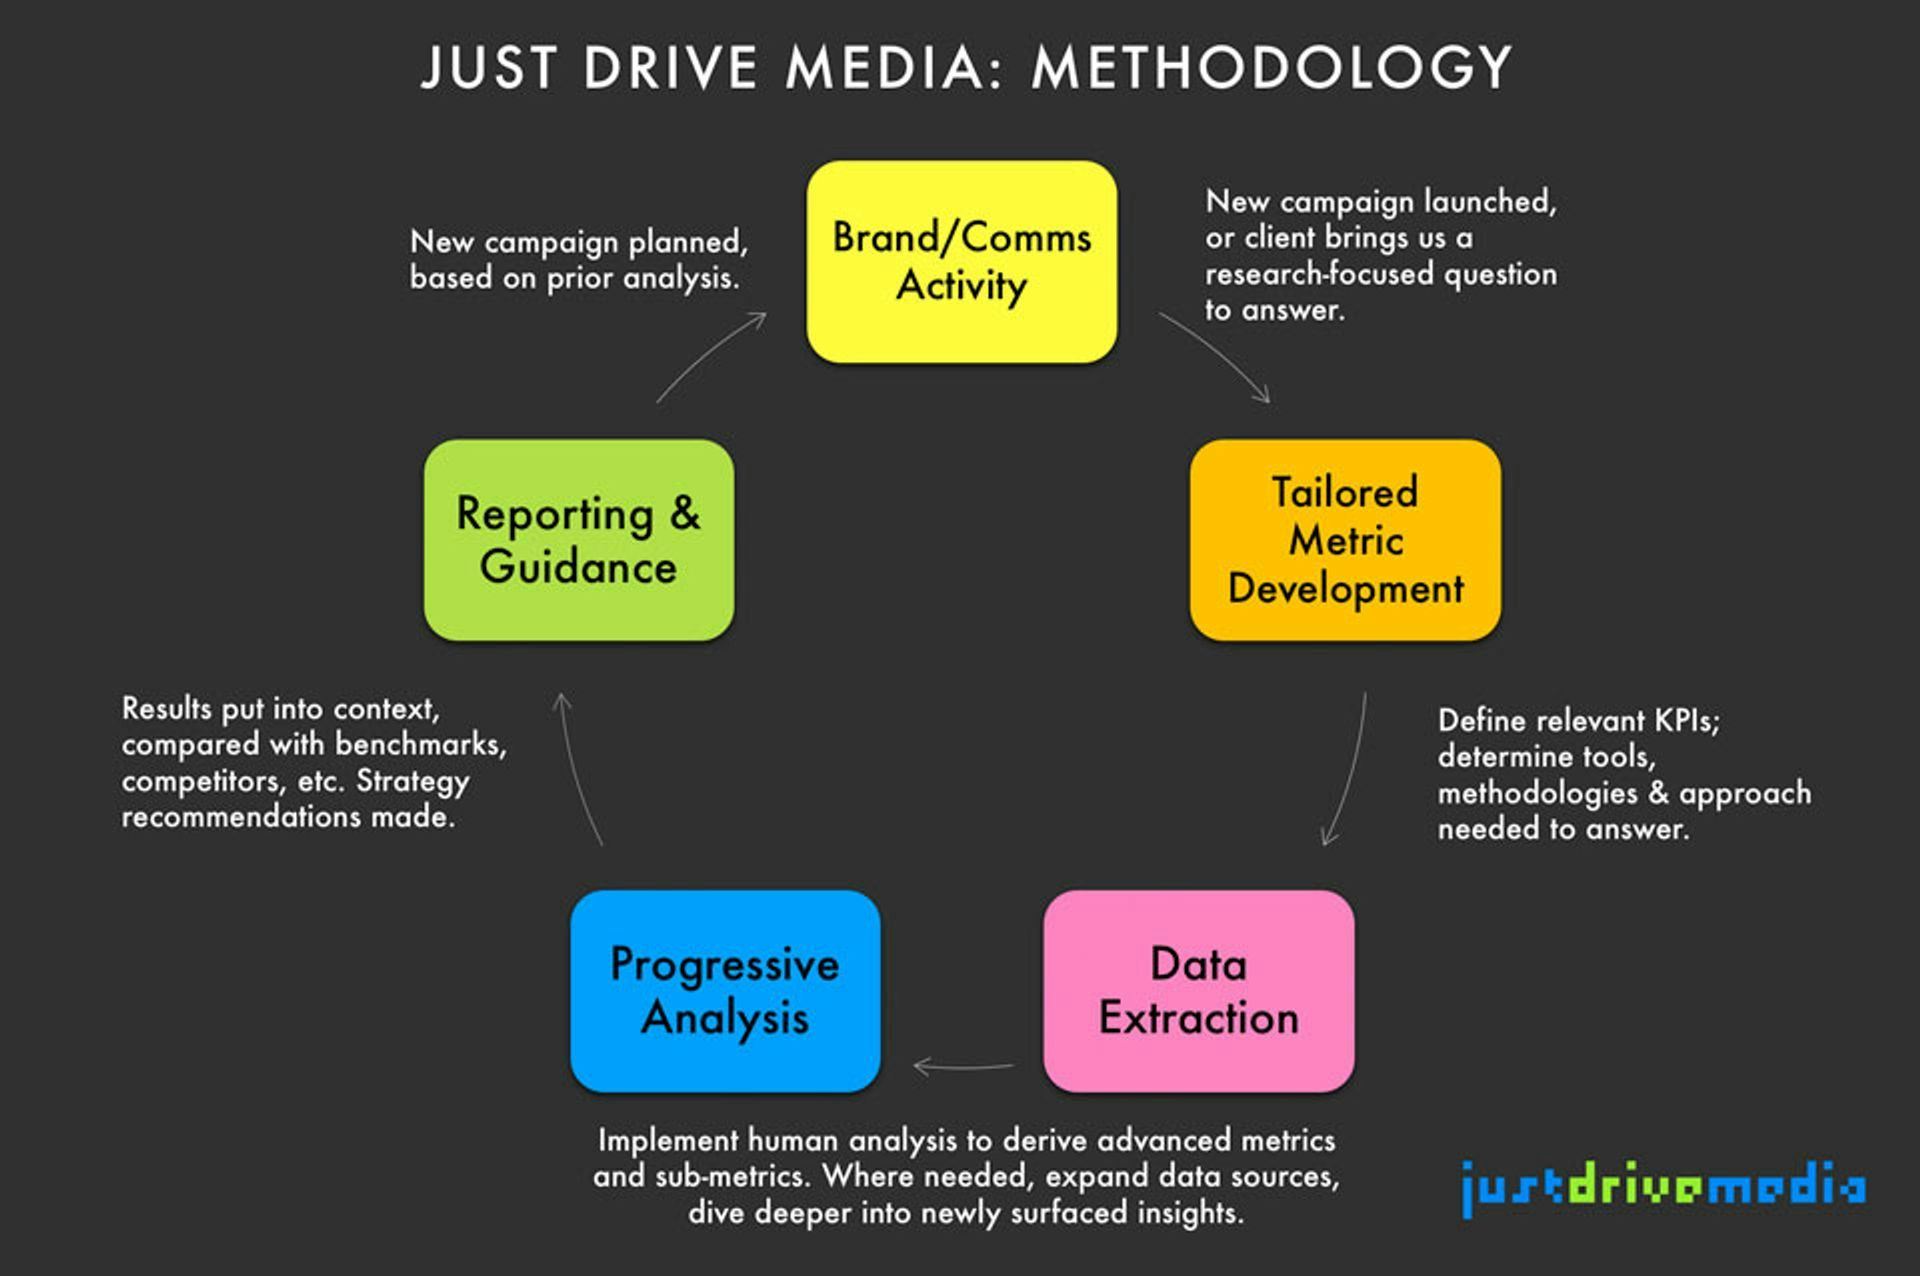 An infographic depicting Just Drive Media's methodology, including campaign planning, metric development, data extraction, and analysis.